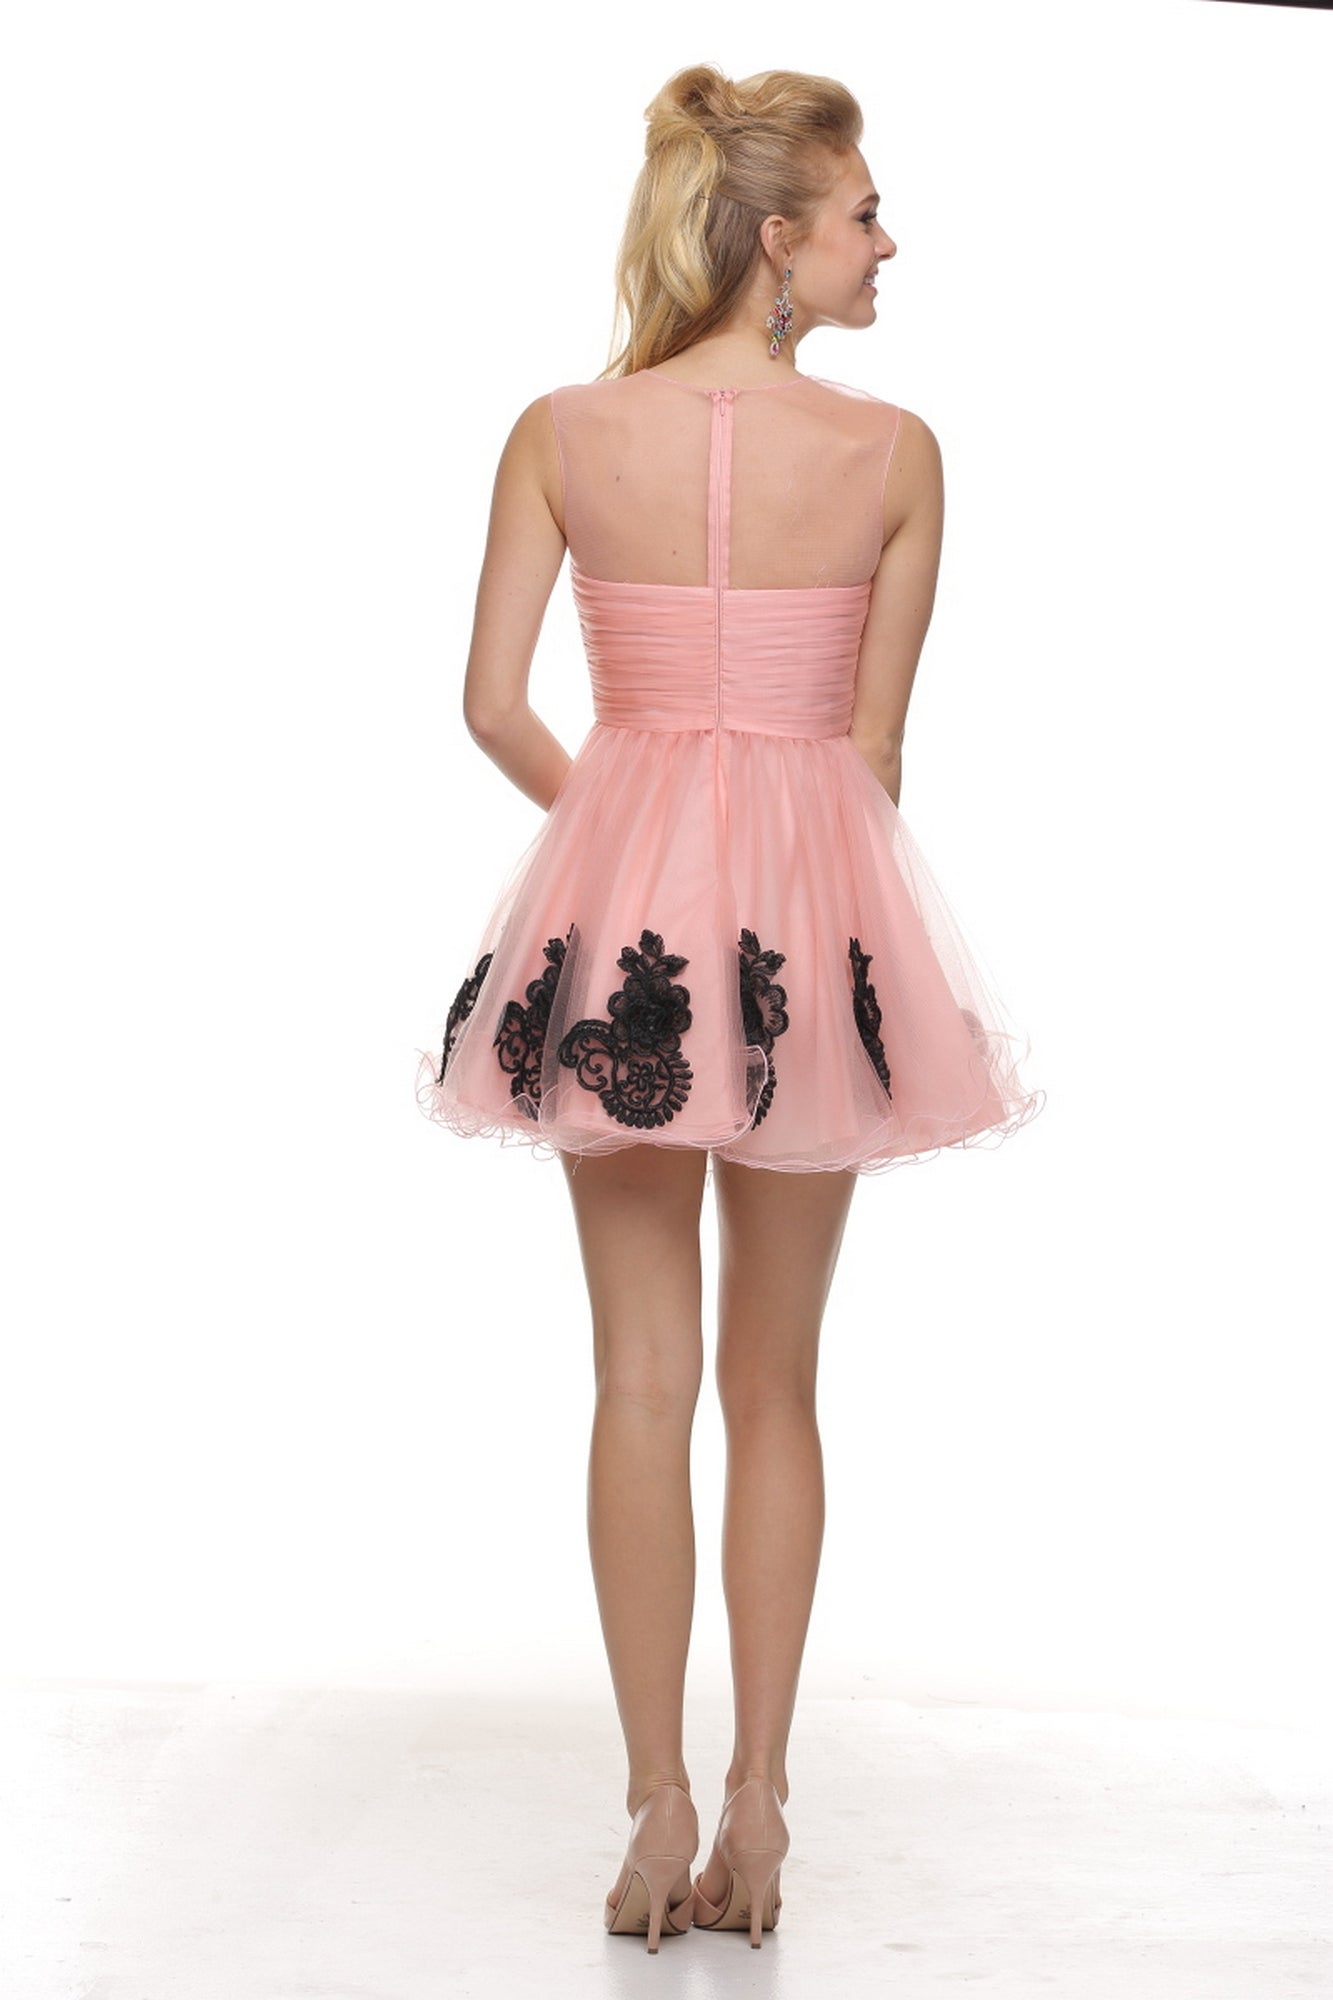  Short Homecoming Dress With Illusion Top